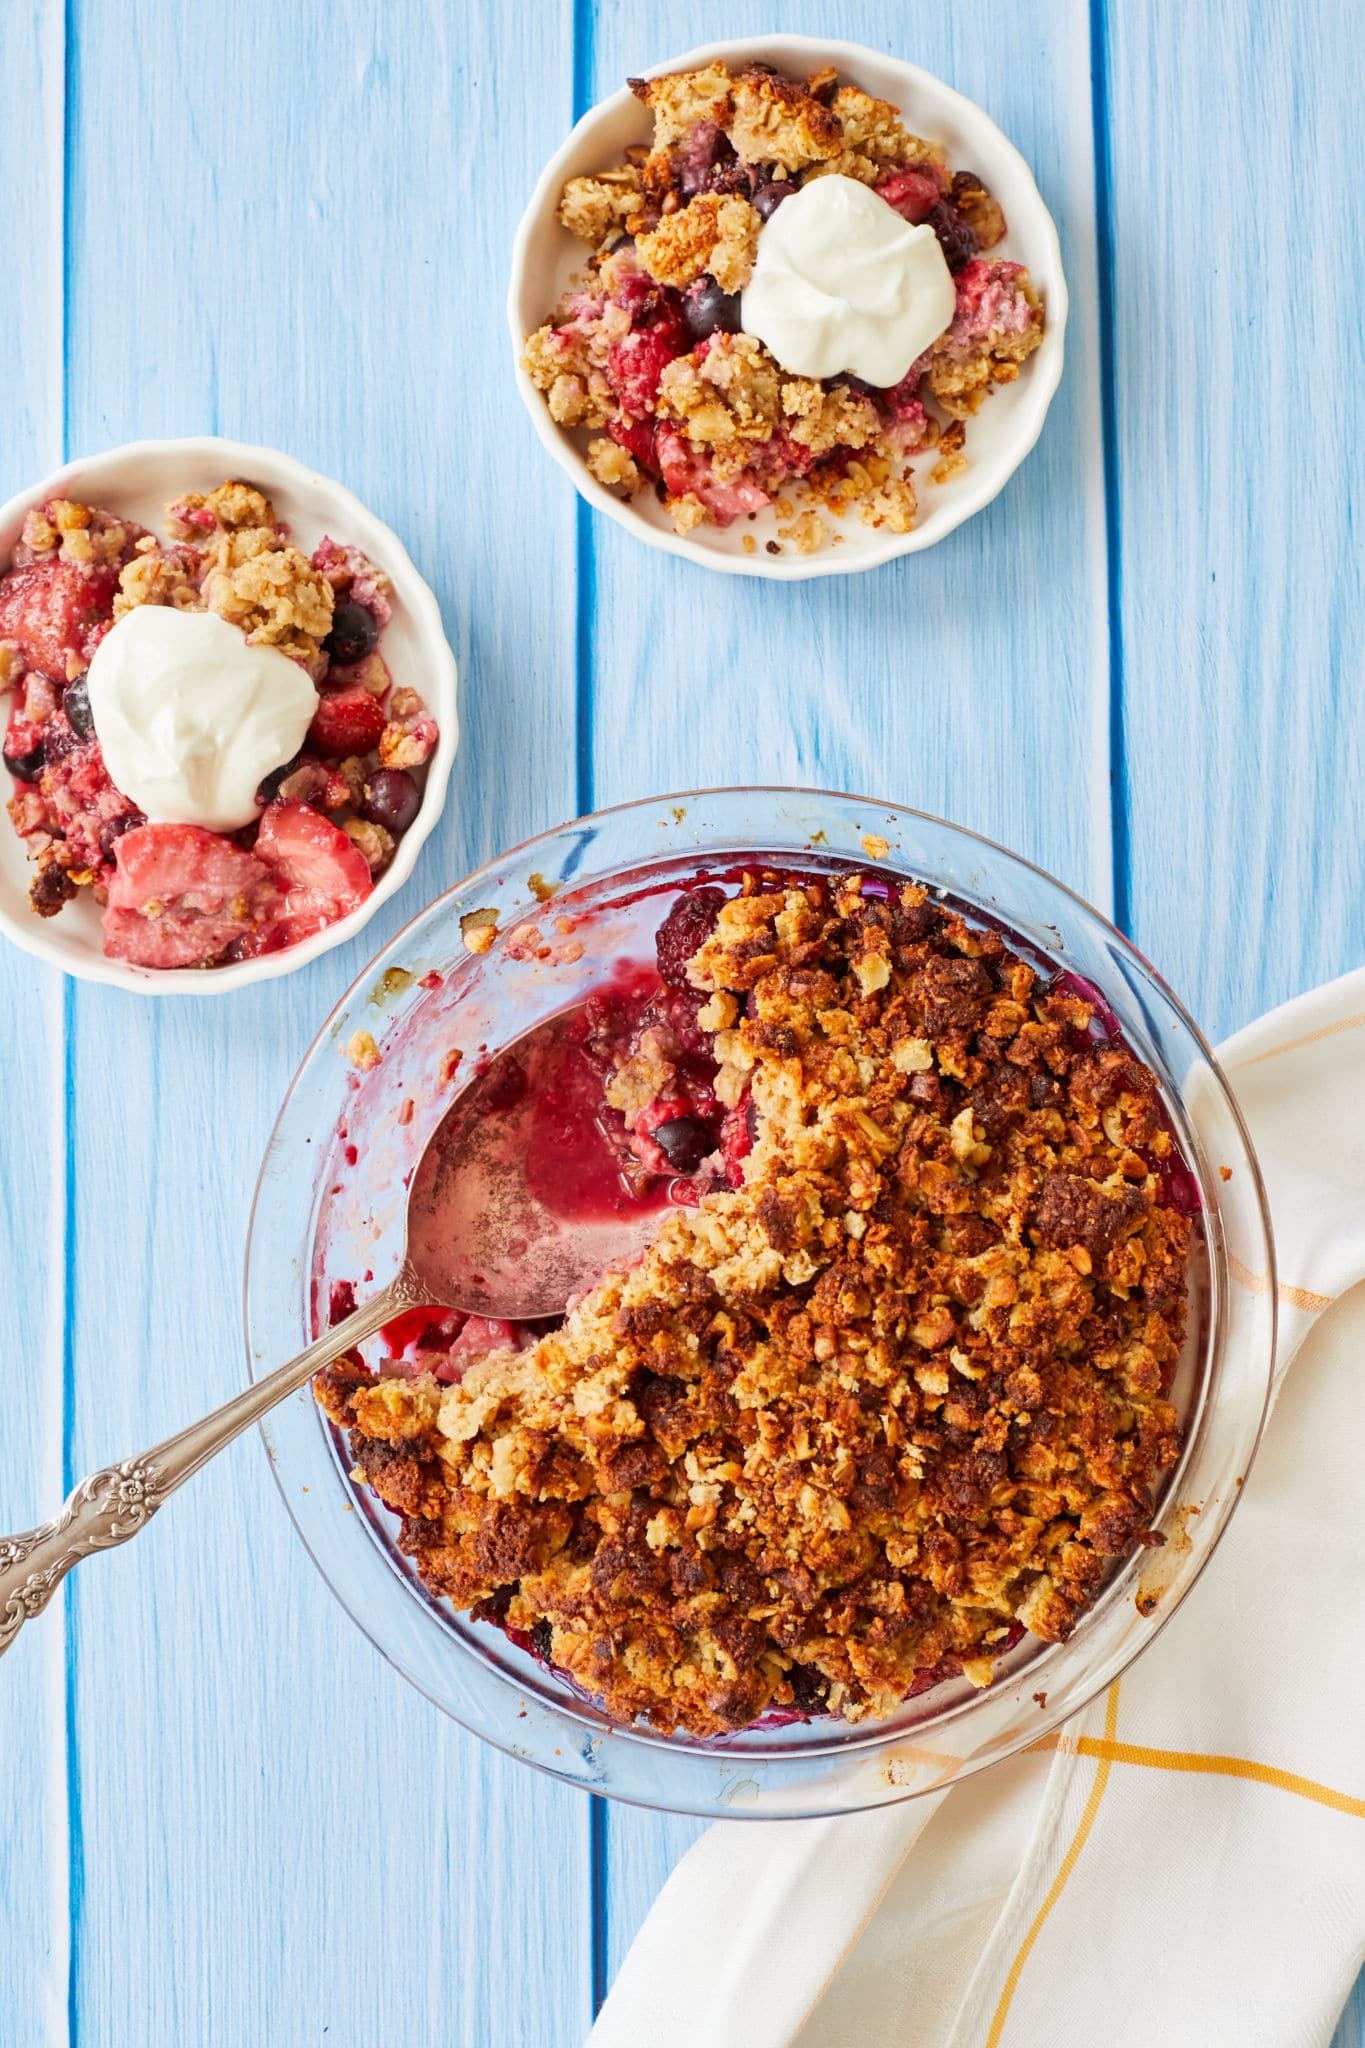 A photo of healthy berry crisp. There are two servings in white bowls next to the main dessert in a clear glass pie tin. Scoops of vanilla Greek yogurt are on top of the crisp.